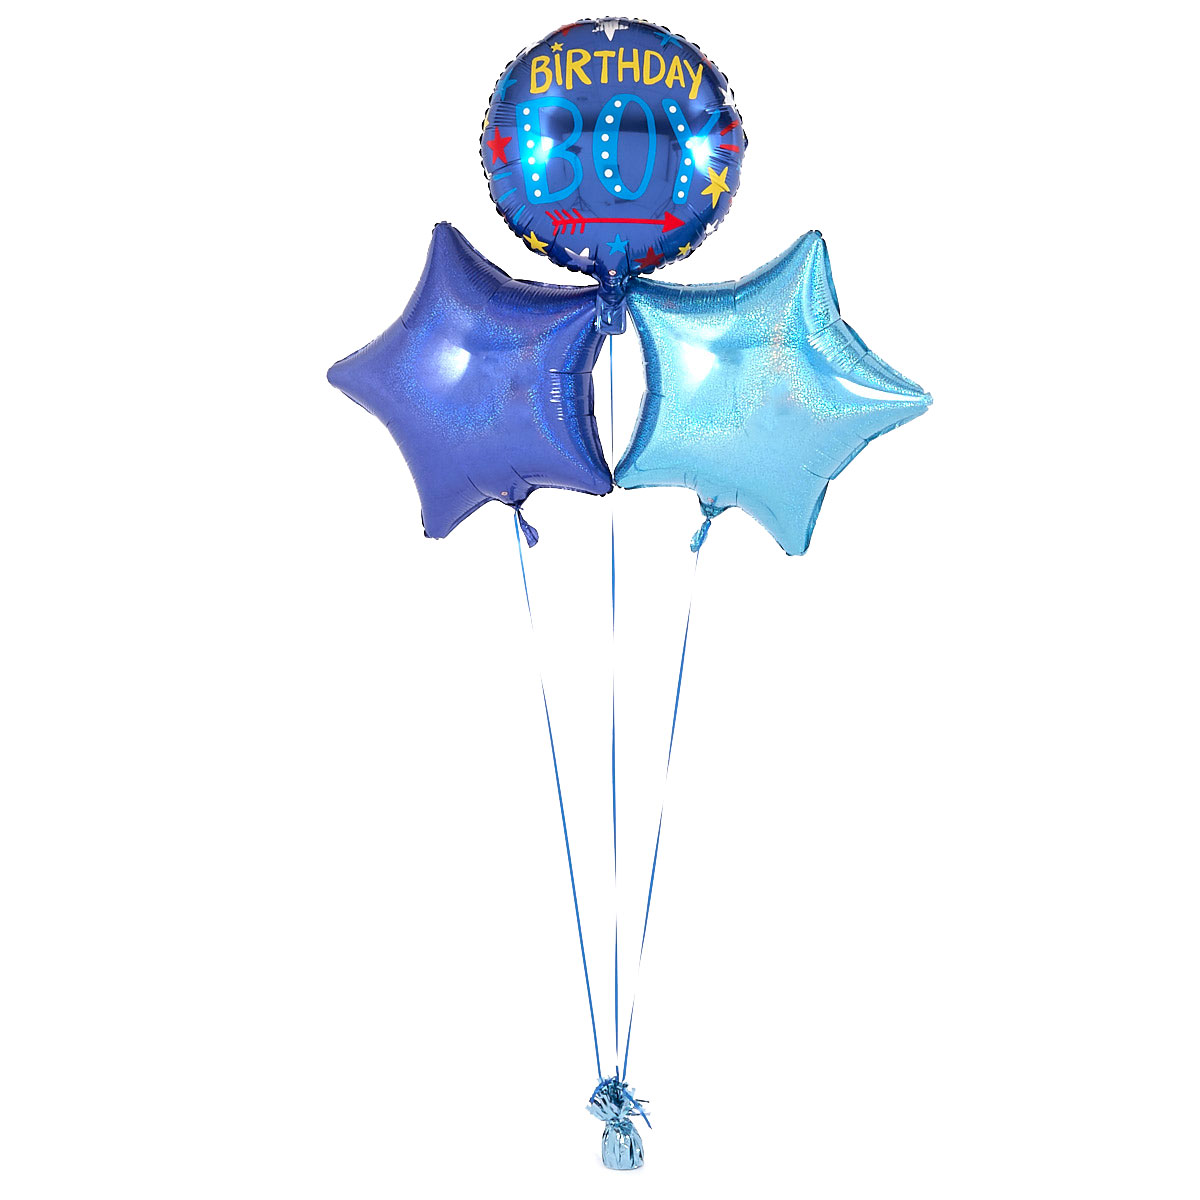 Birthday Boy Blue Balloon Bouquet - DELIVERED INFLATED!